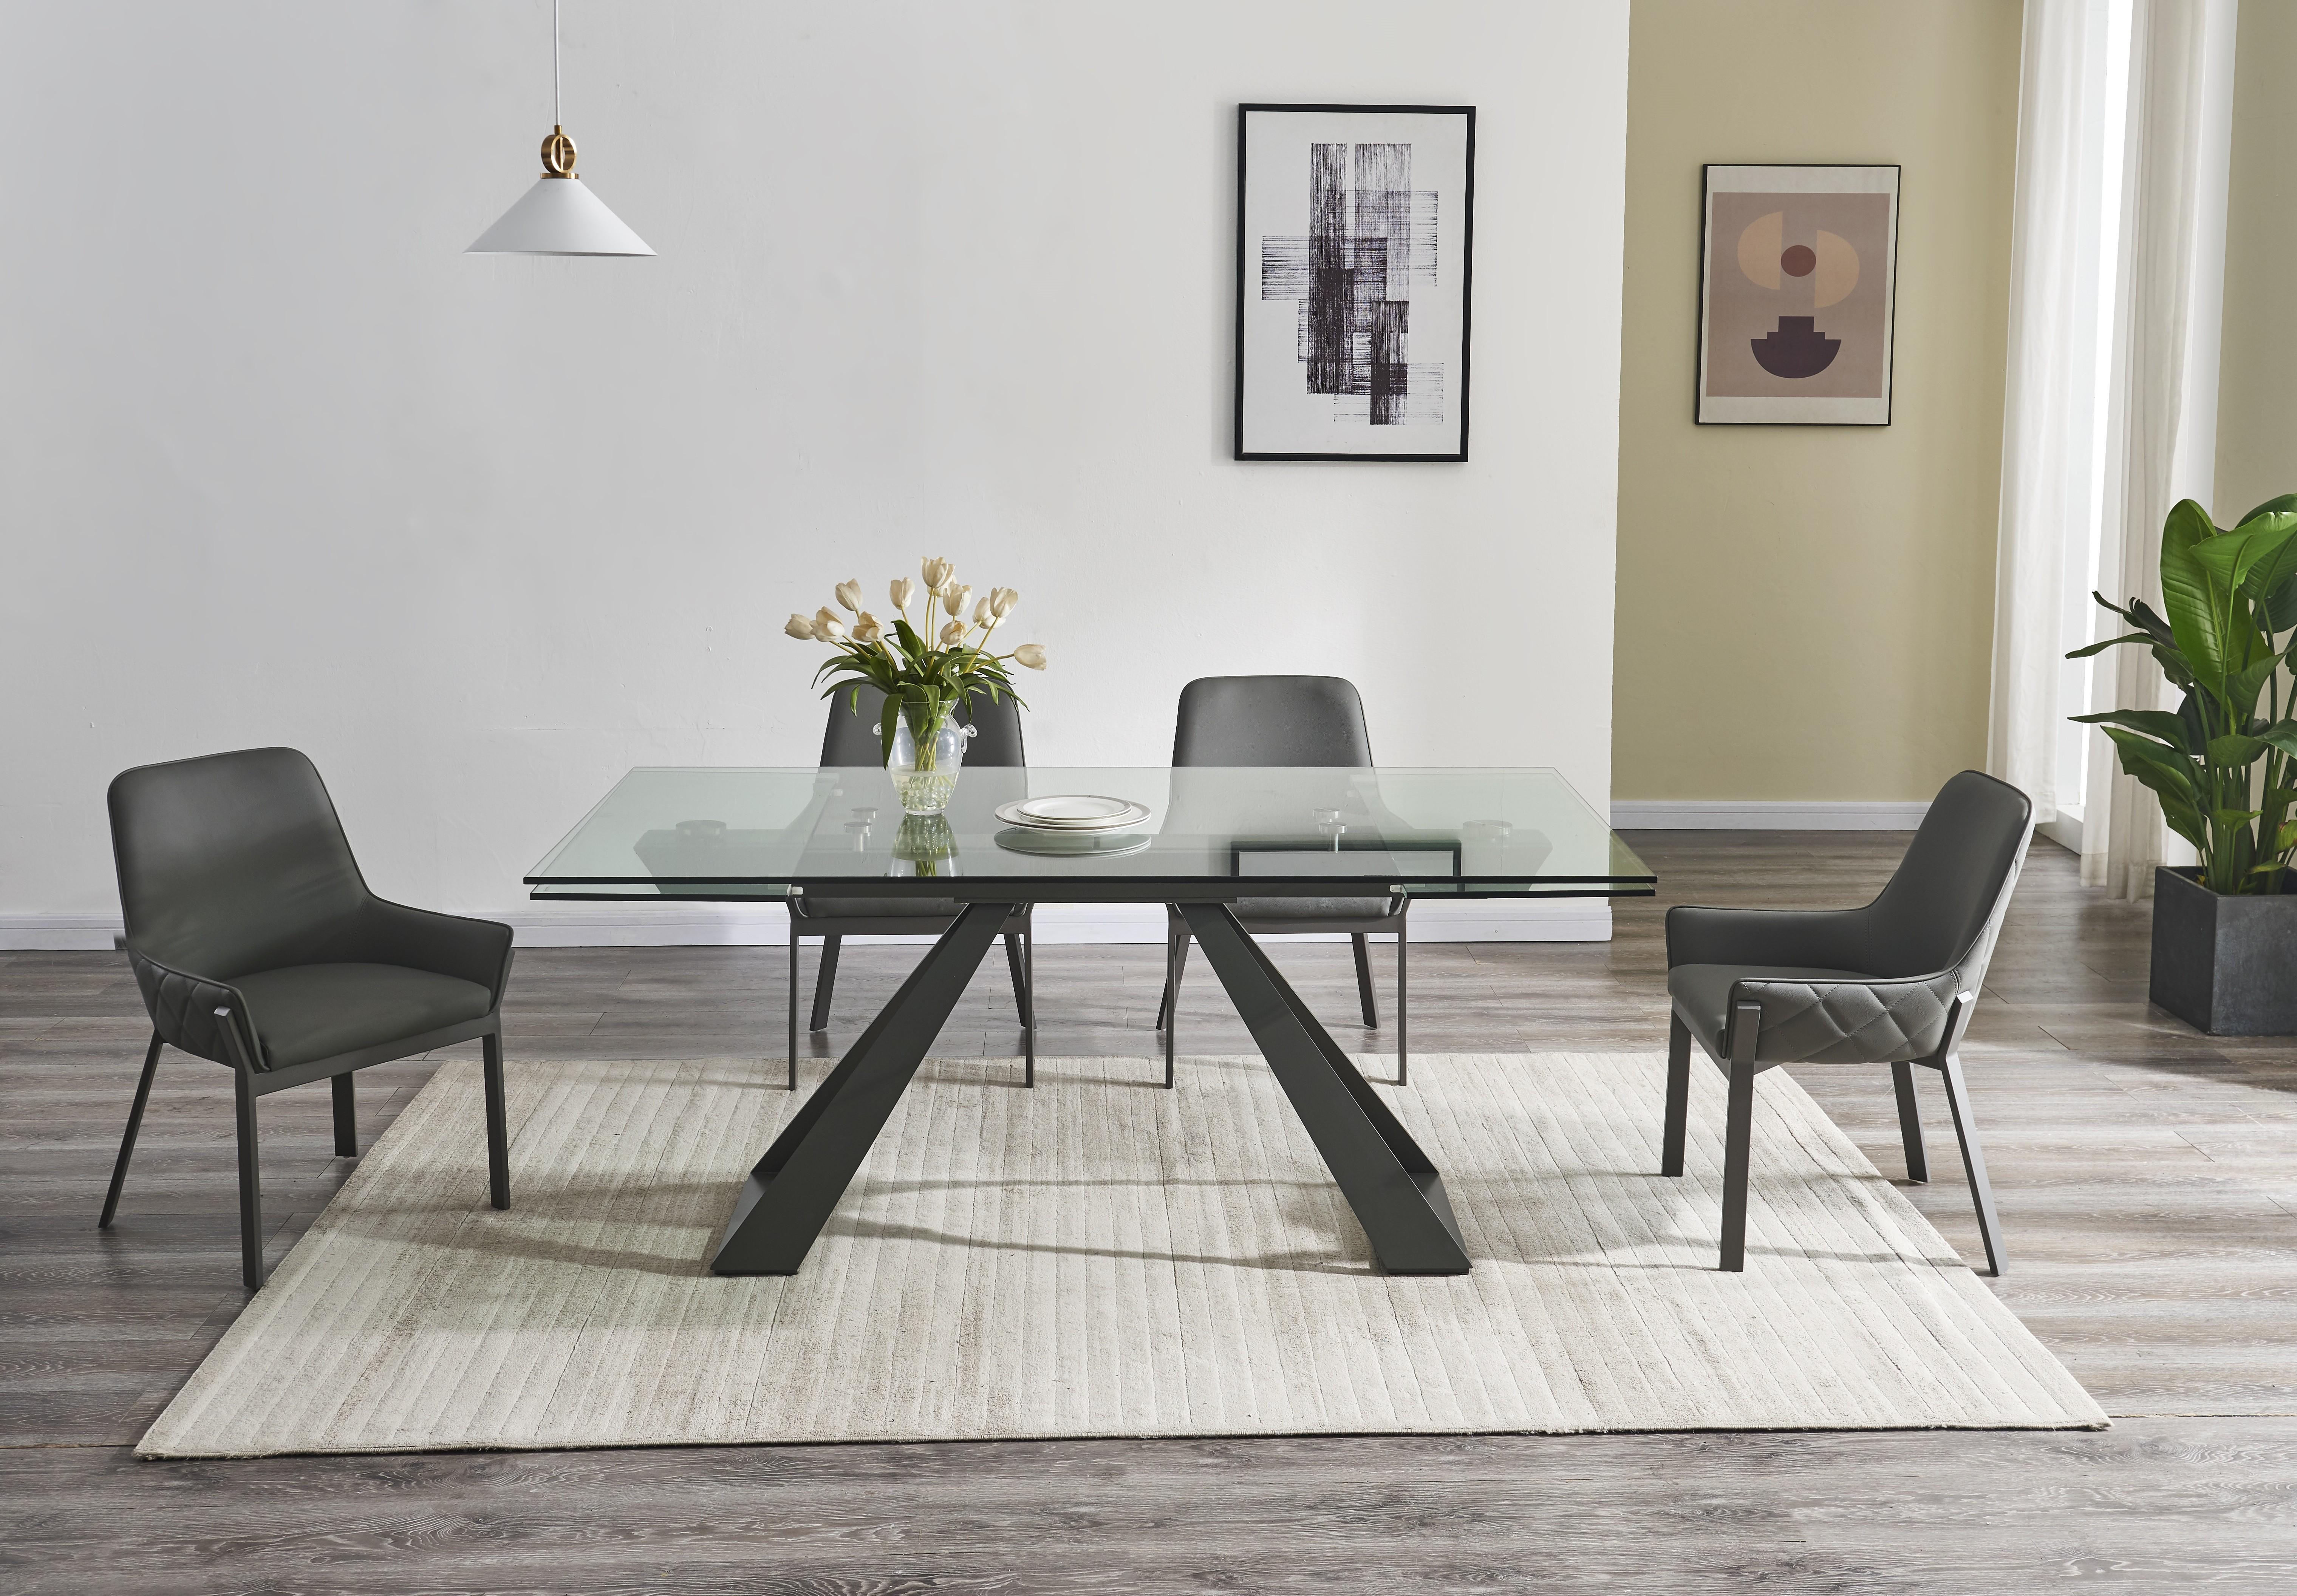 Contemporary, Modern Dining Room Set San Diego Venice 17255-5pcs in Gunmetal, Clear, Gray Leather